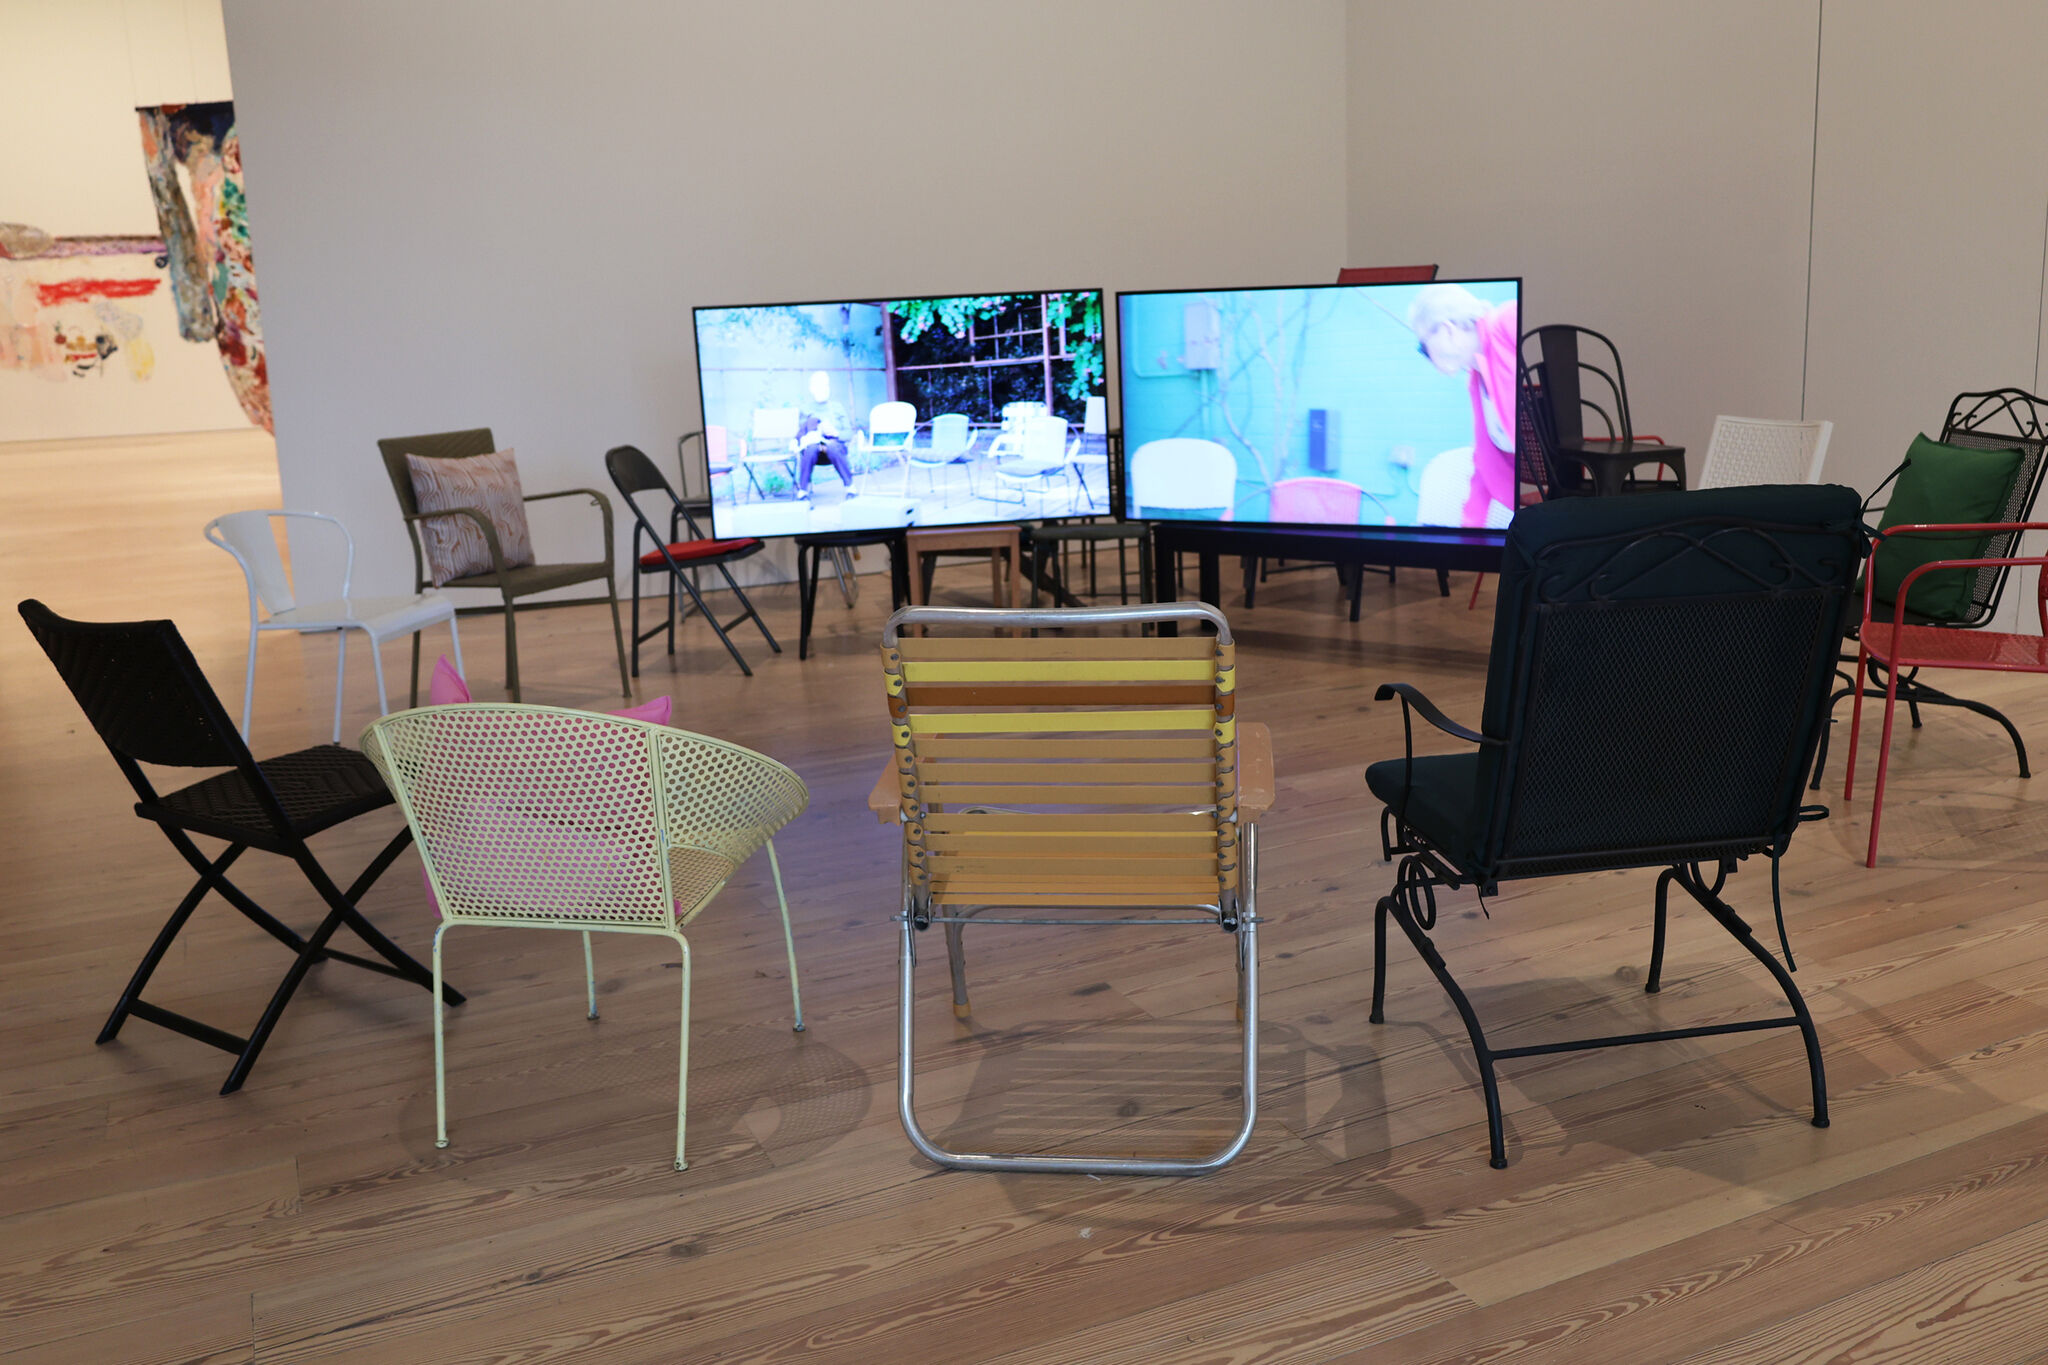 Assorted chairs gathered in a circle around two video screens.